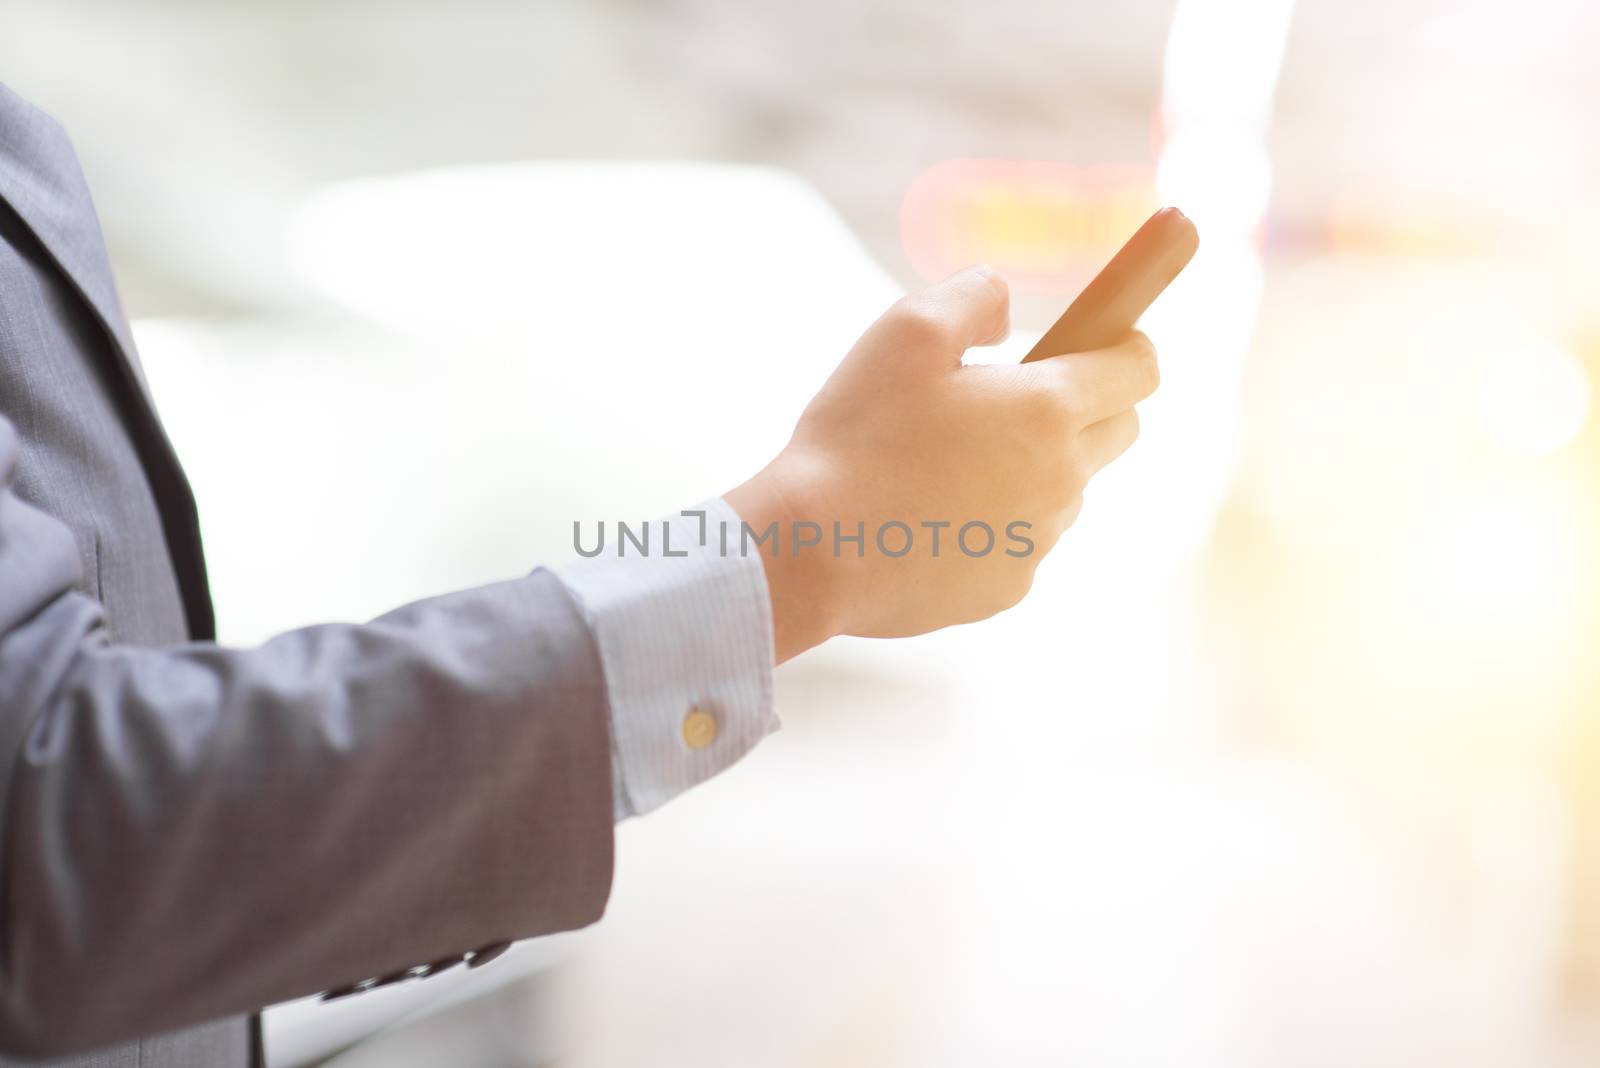 Business people using smart phone outdoors, focus on hand, bright sun flare background.